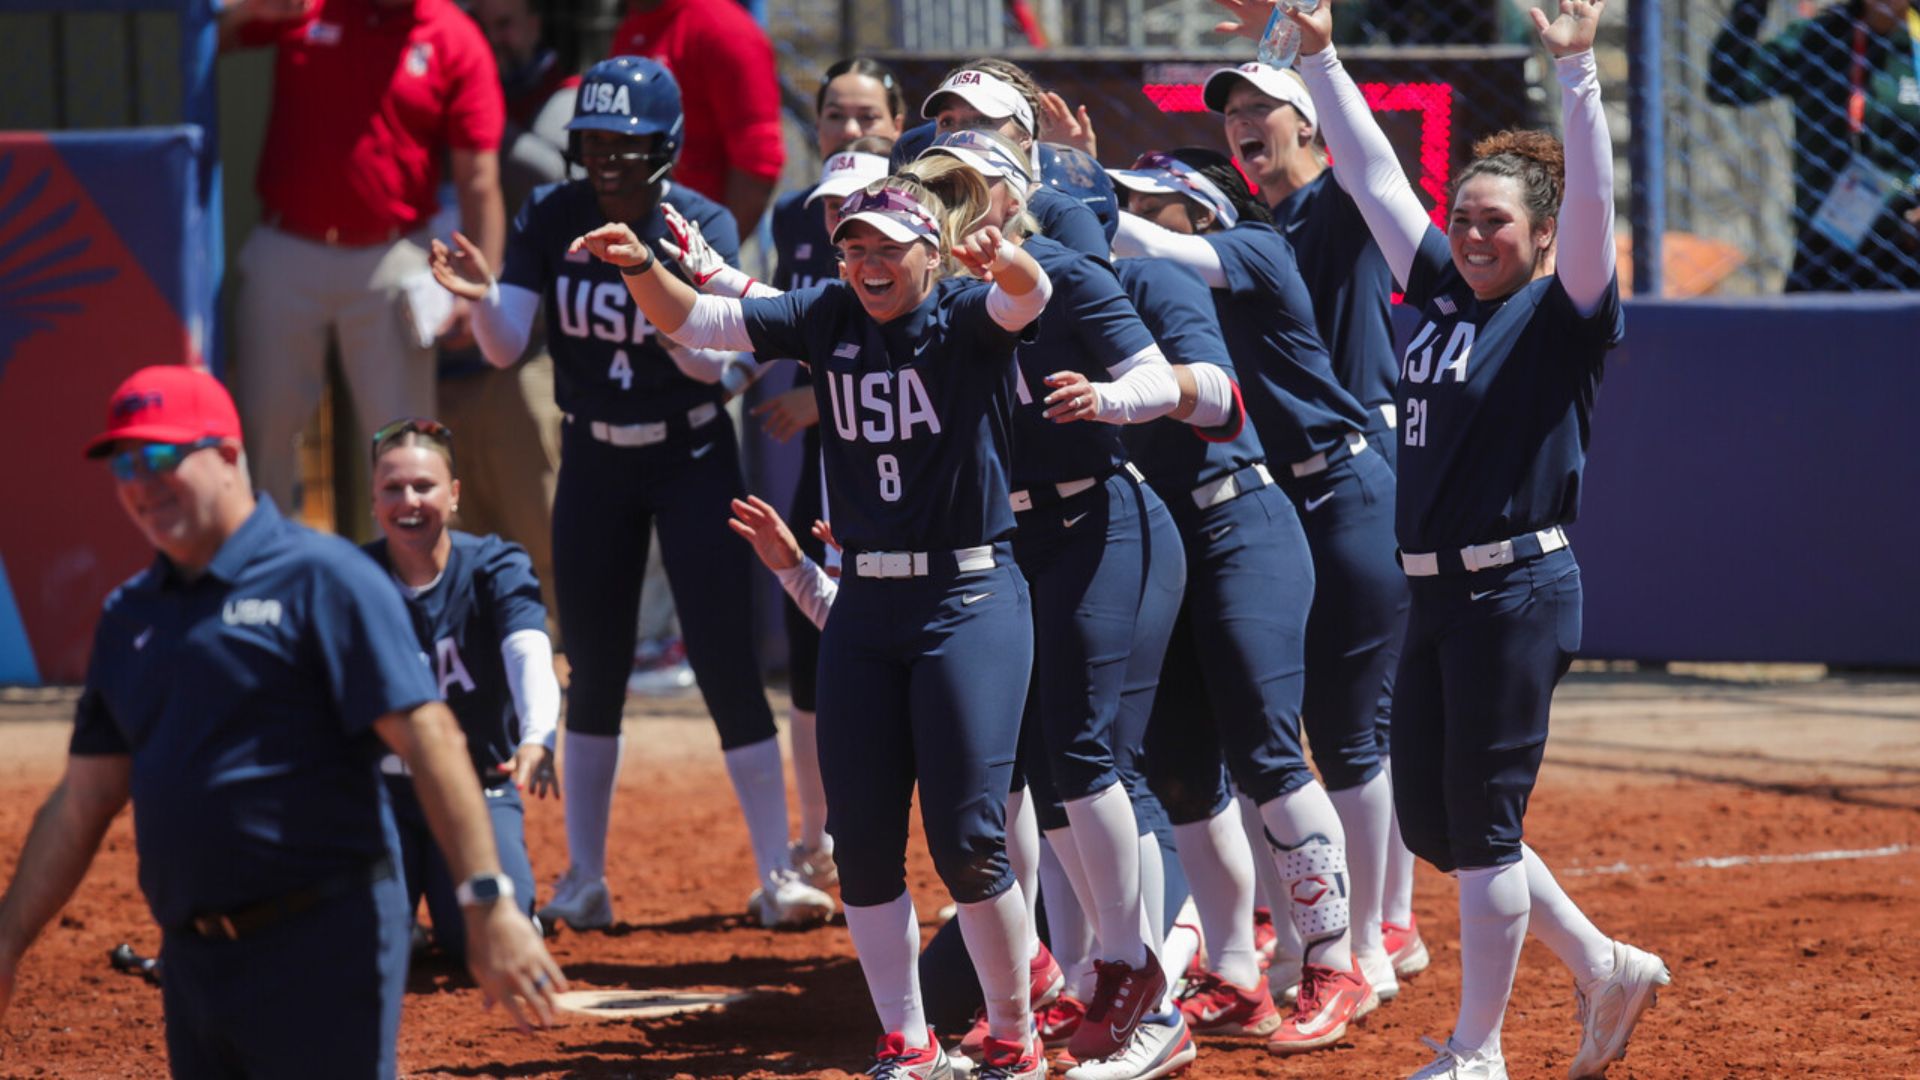 United States reaffirms its dominance by winning gold in softball